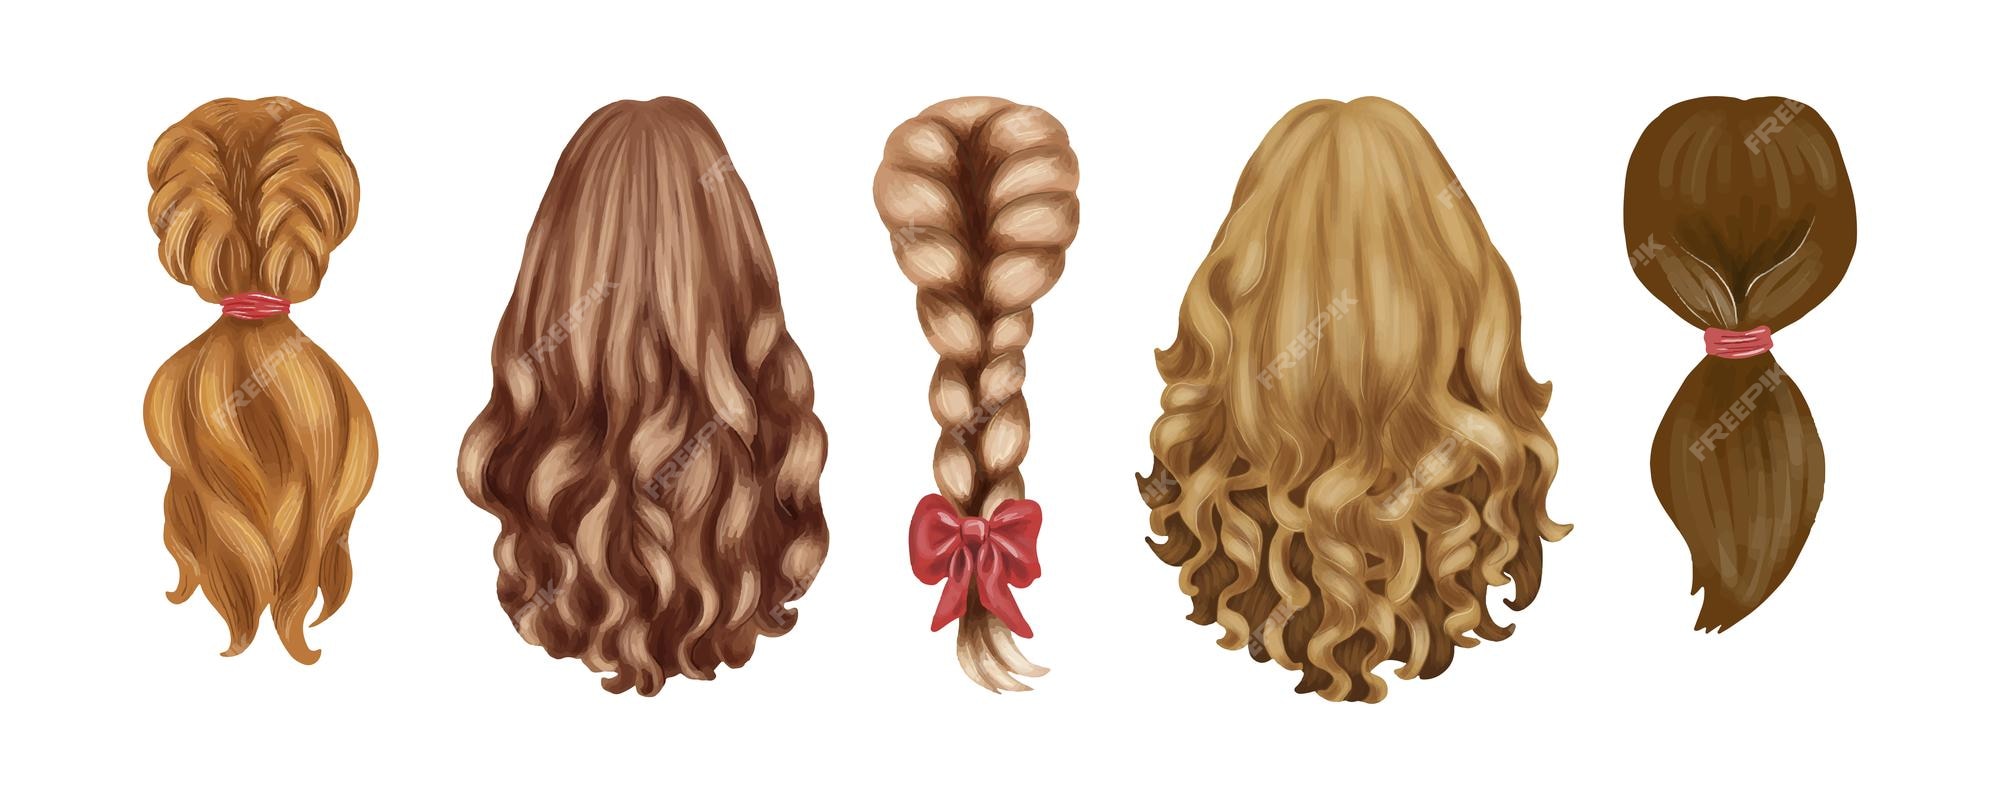 Premium Vector | Set of hairstyles for long hair